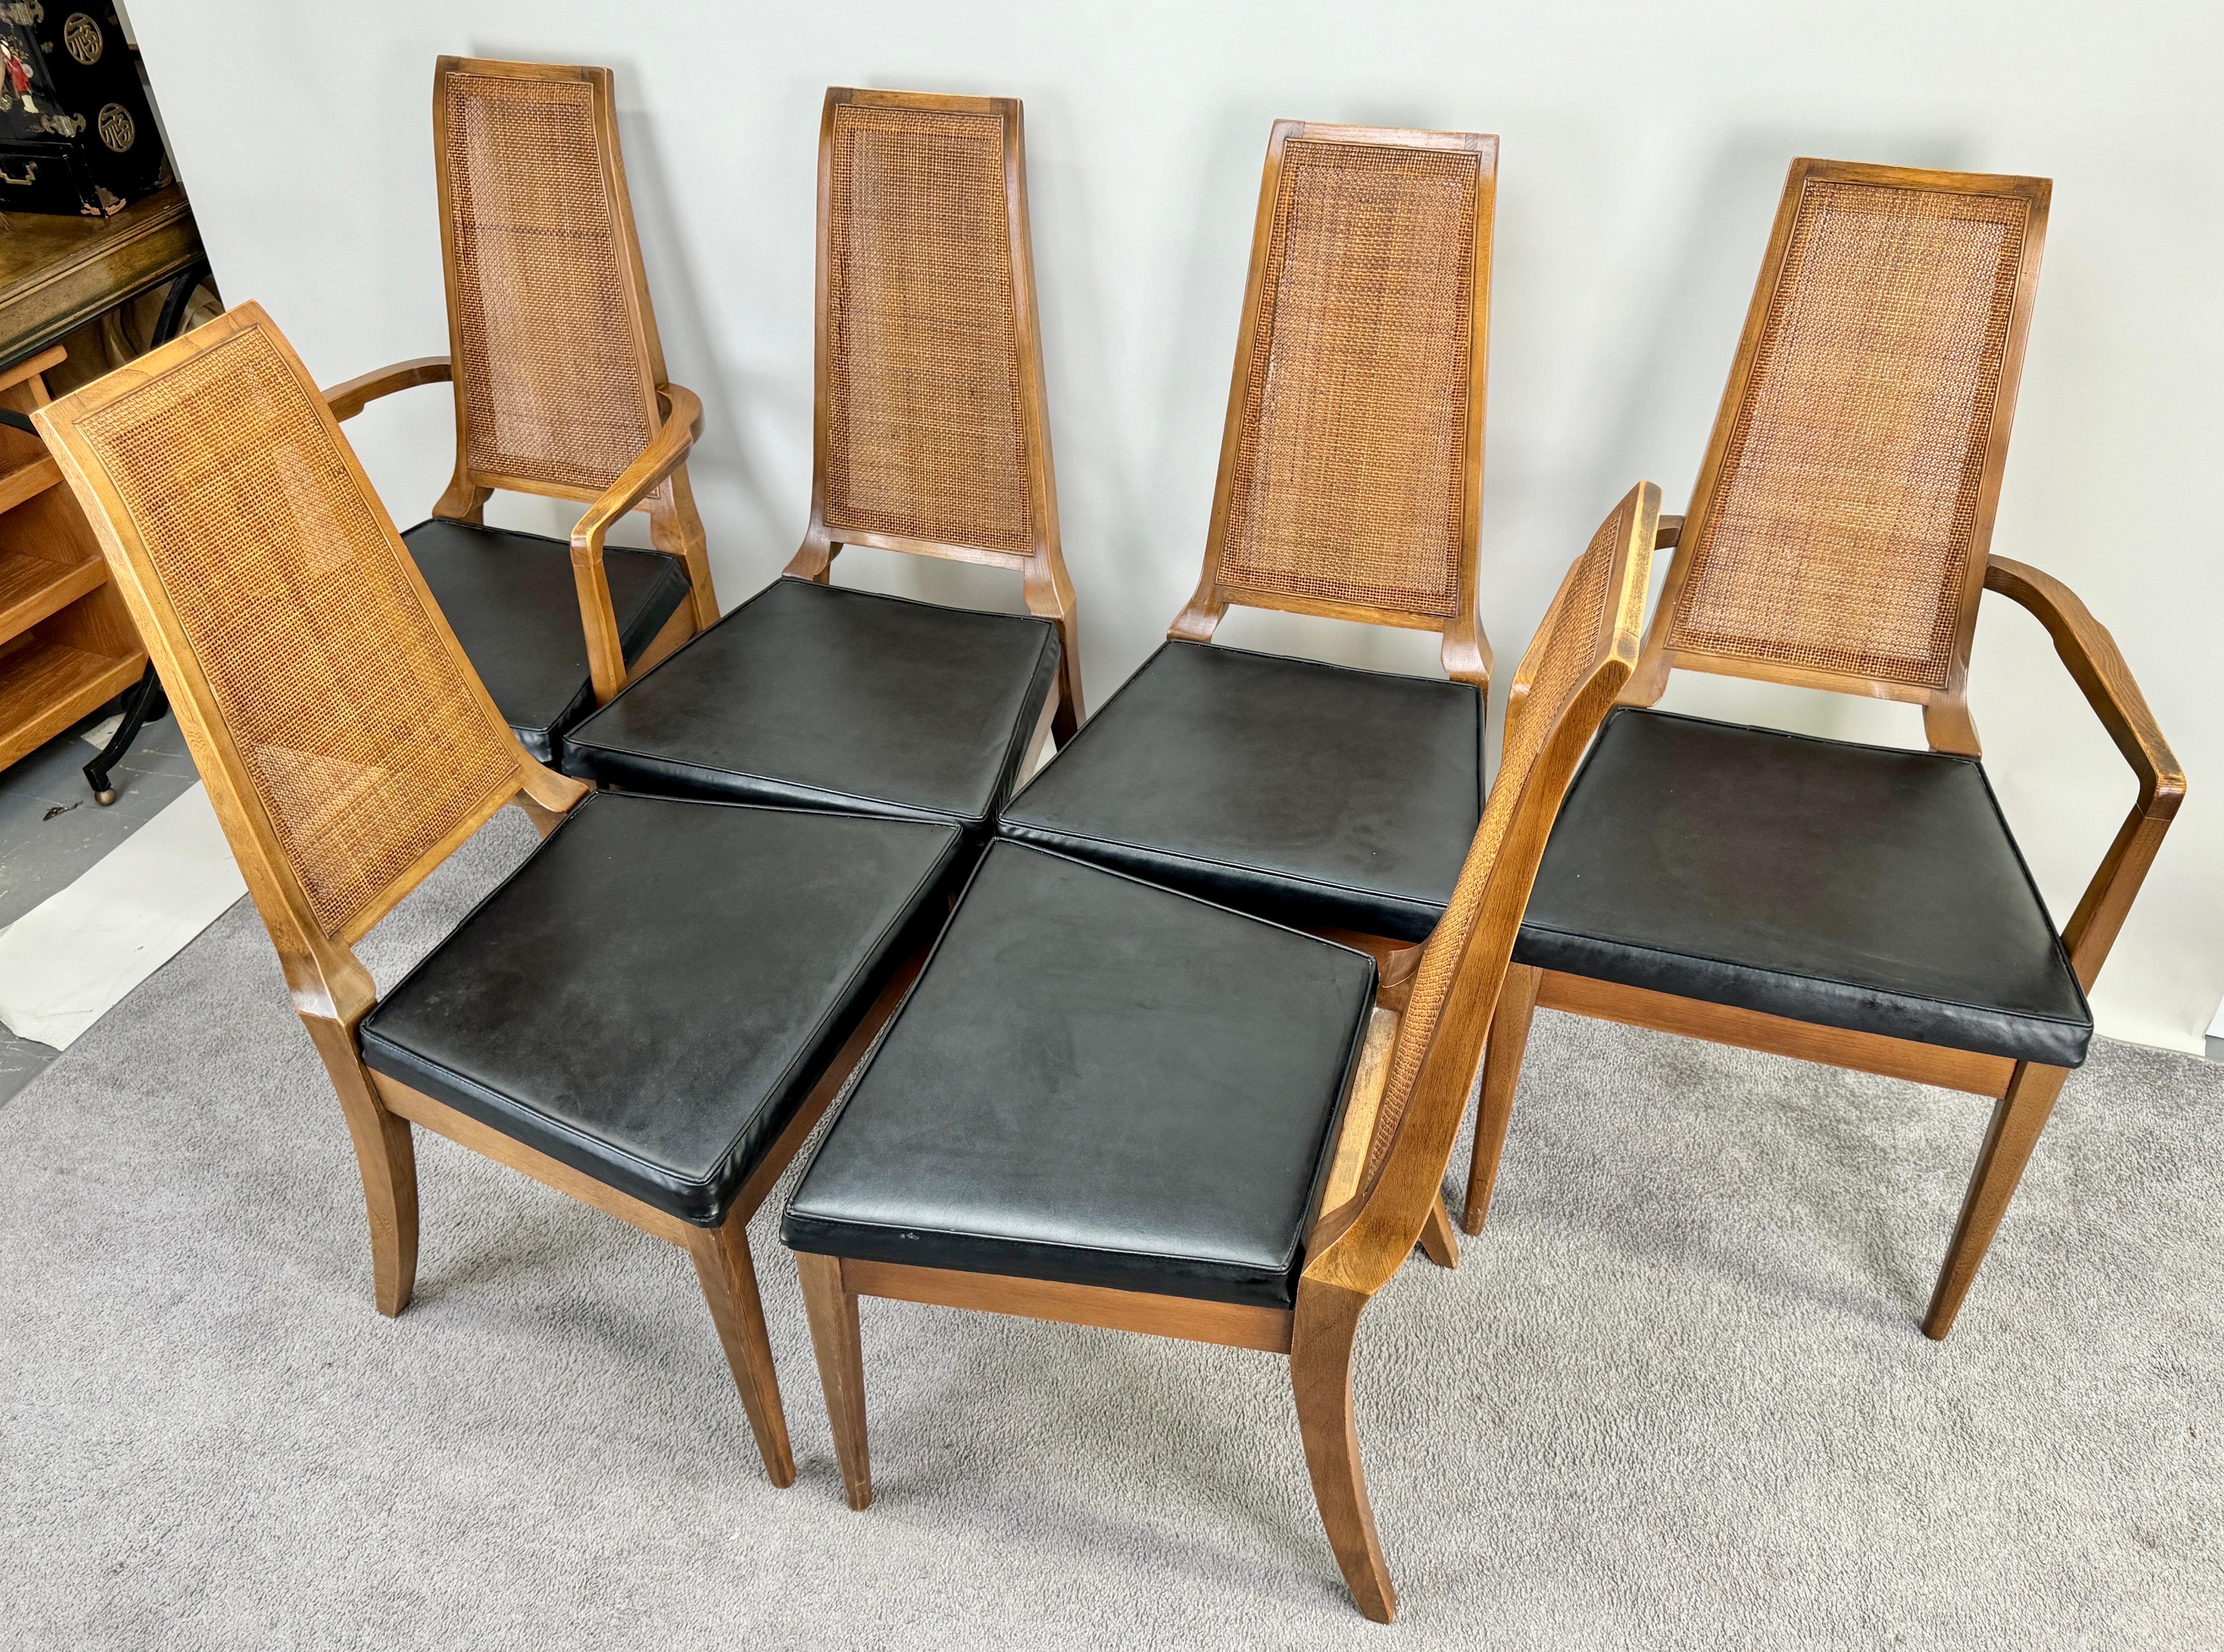 A set of six Mid Century Modern dining chairs, a testament to the refined craftsmanship of the American Furniture Co of Martinsville, VA. This collection comprises two graceful armchairs and four equally elegant regular chairs, each embodying the